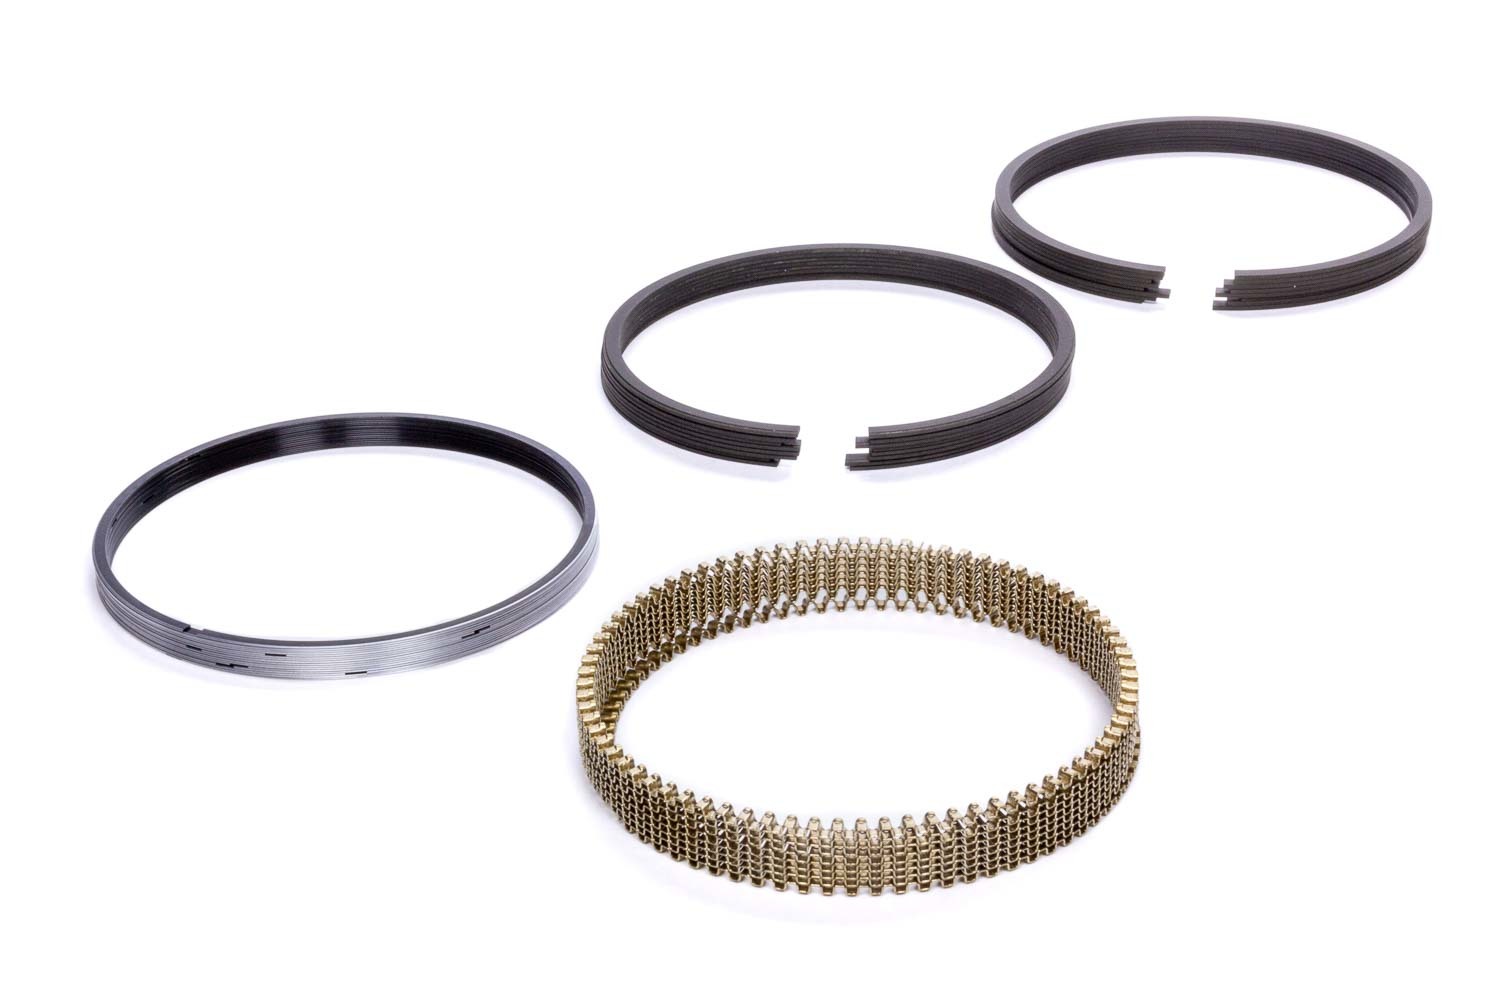 Hastings Piston Rings SN9045 Piston Rings, Premium Ductile and Steel Series, 4.000 in Bore, Drop In, 1.2 x 1.2 x 3.0 mm Thick, Standard Tension, Stainless Steel, Gas Nitride, 8-Cylinder, Kit